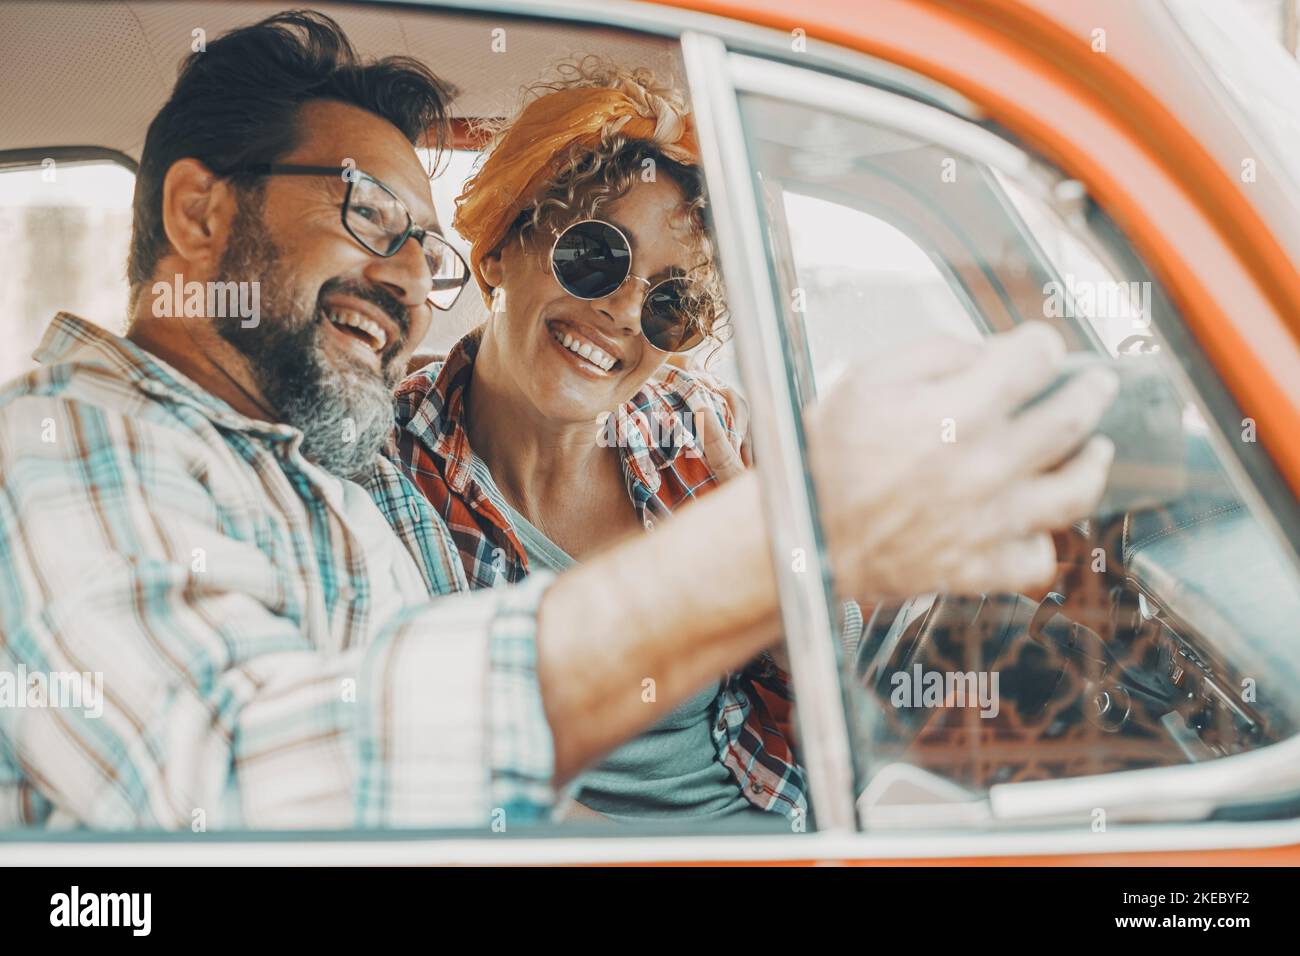 Happy couple having fun inside a car during travel adventure. Cheerful man and woman smiling and laughing a lot together. People enjoying vehicle trip in friendship and relationship. Concept of drive Stock Photo